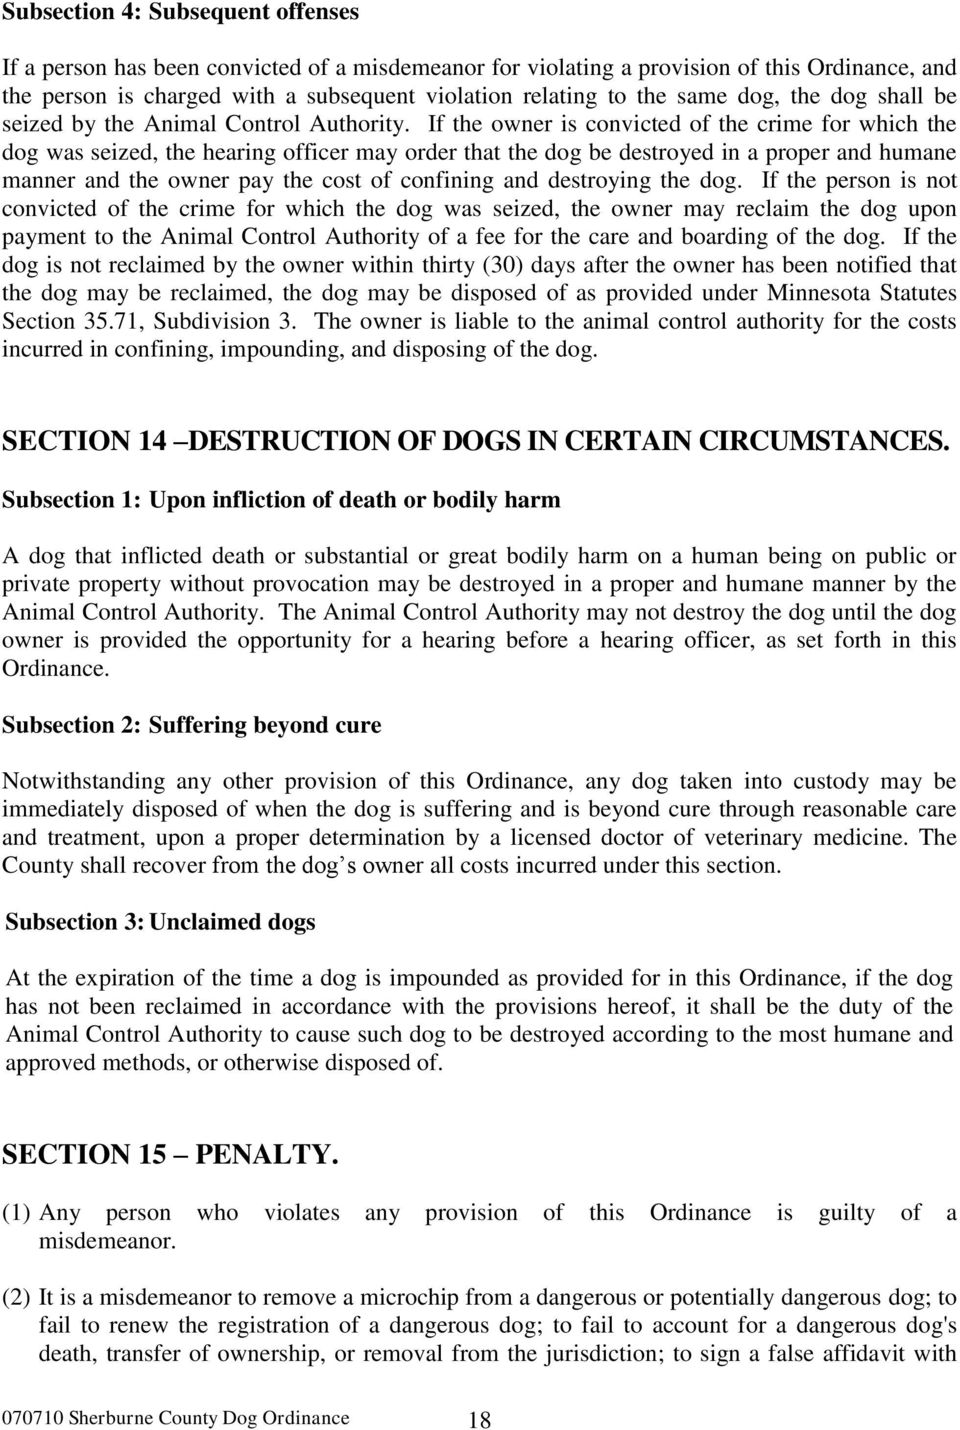 If the owner is convicted of the crime for which the dog was seized, the hearing officer may order that the dog be destroyed in a proper and humane manner and the owner pay the cost of confining and